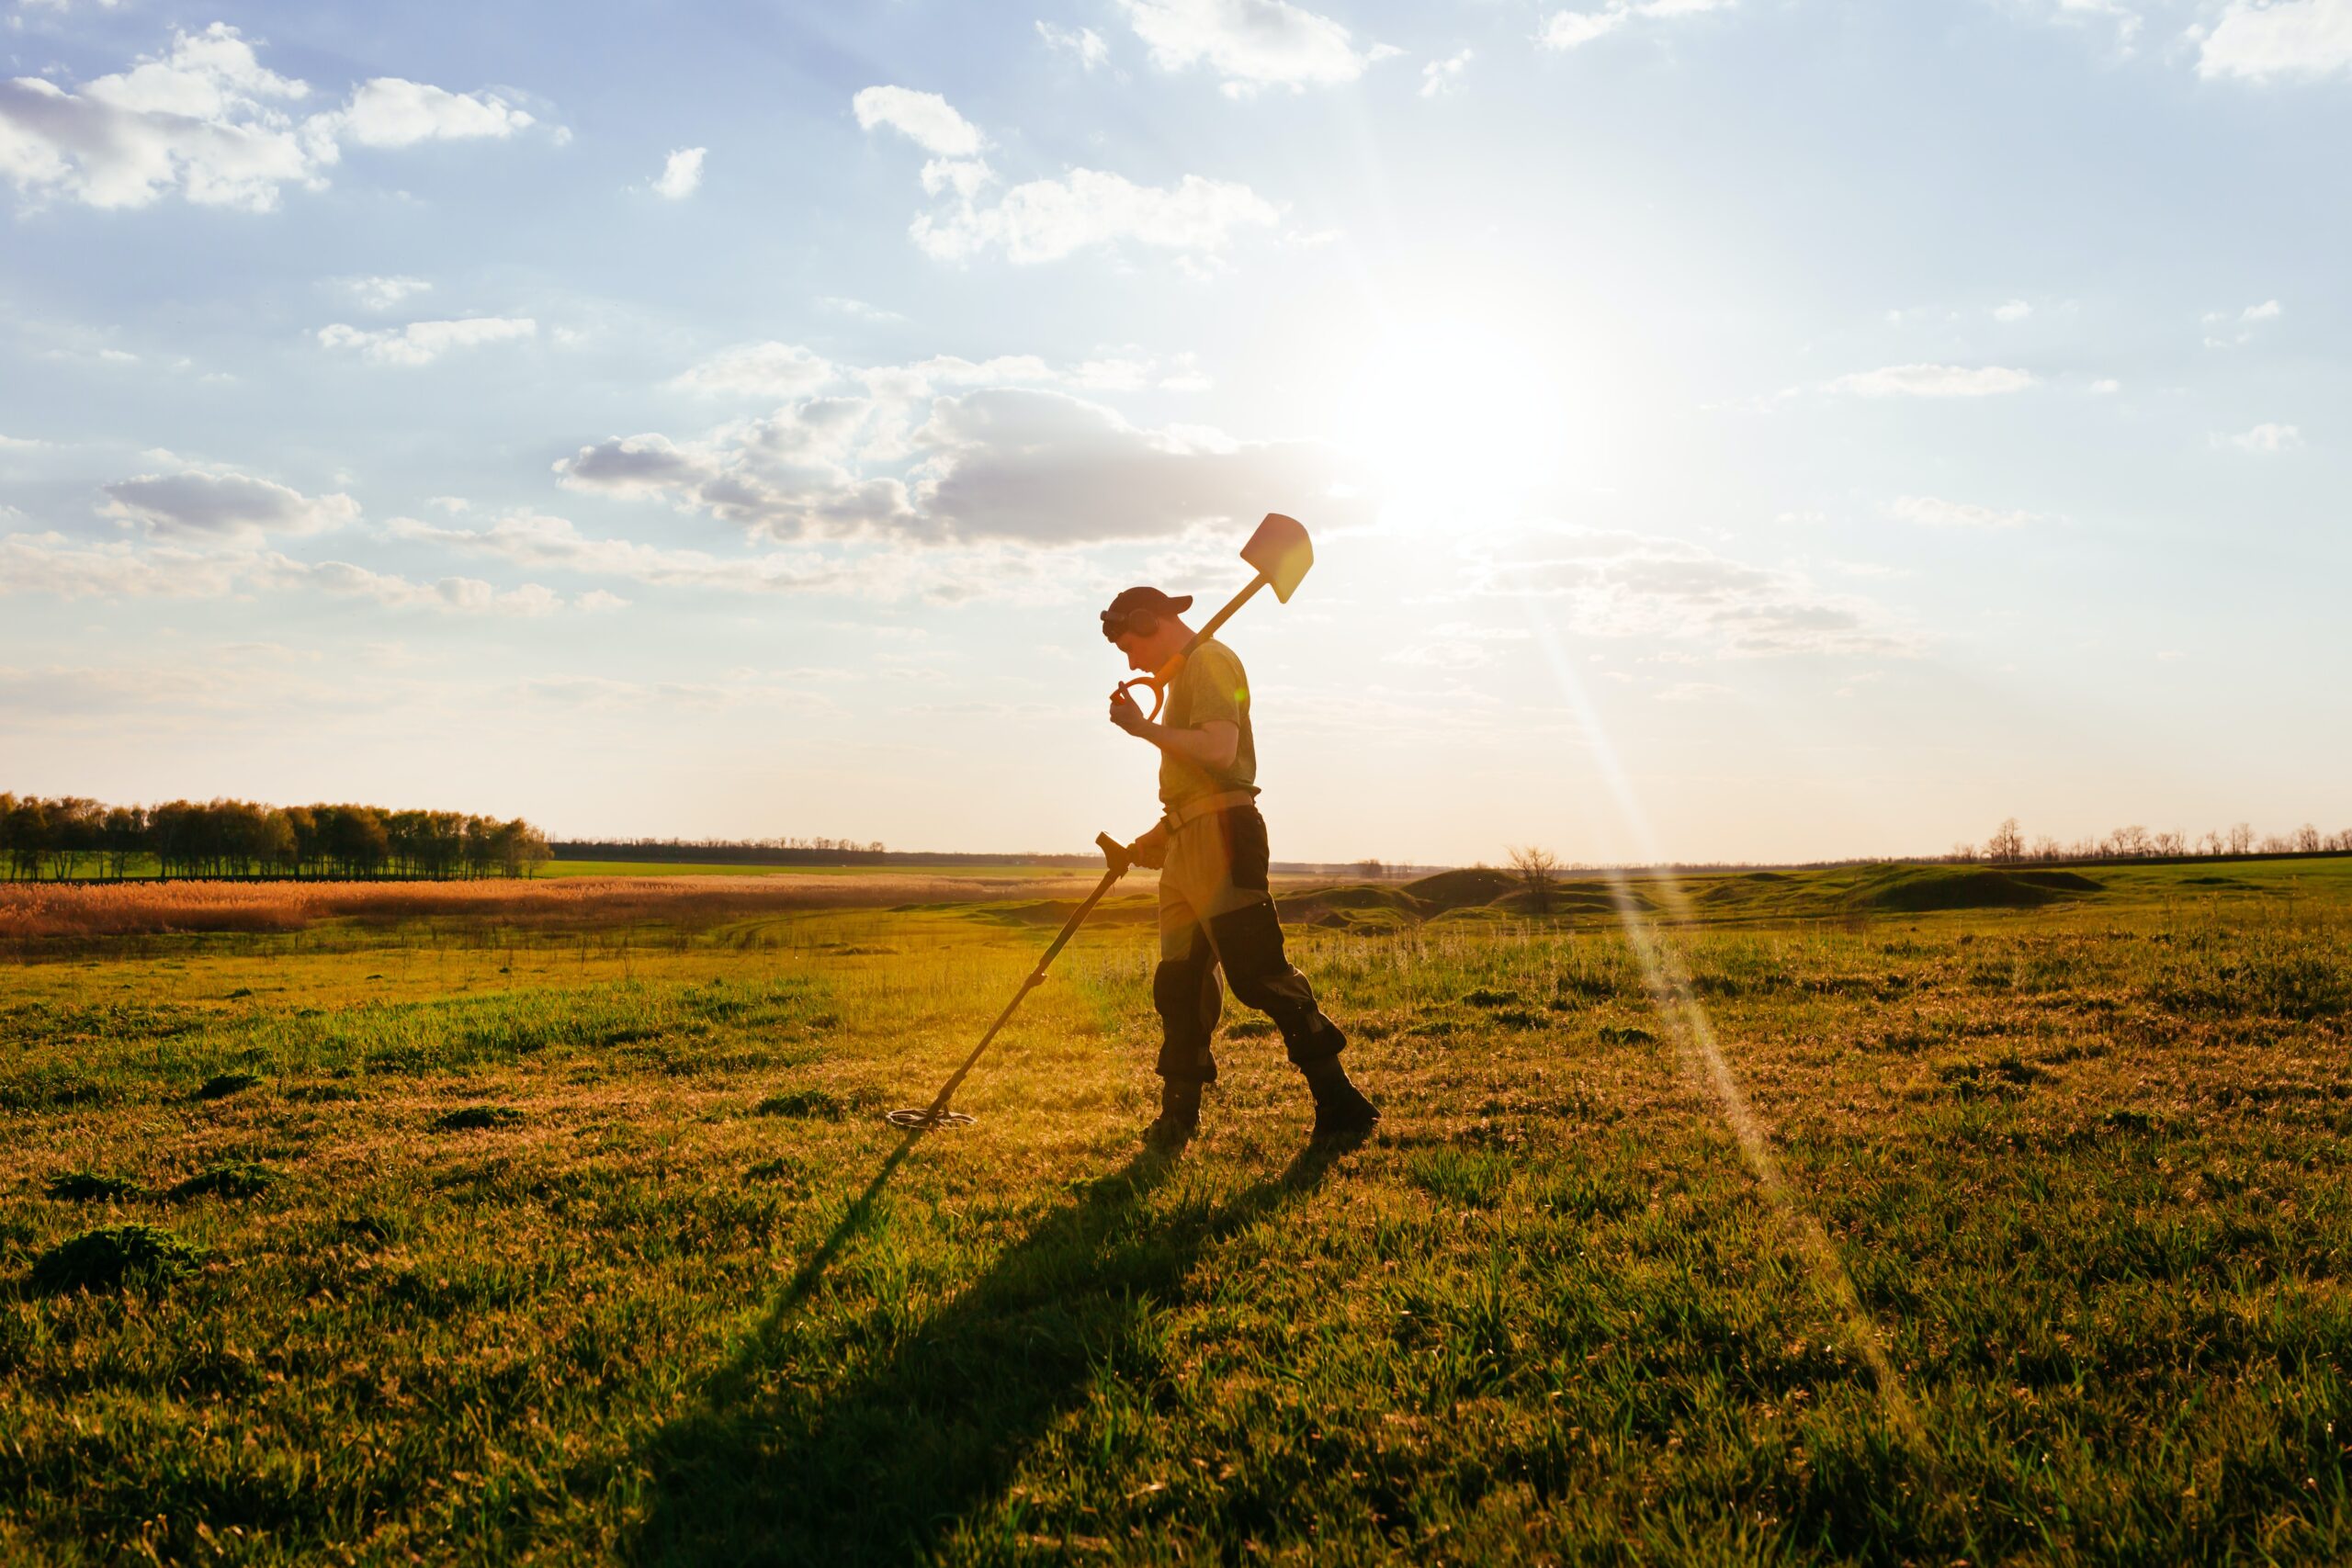 A man in a field holding a pole, searching for gold with a metal detector.